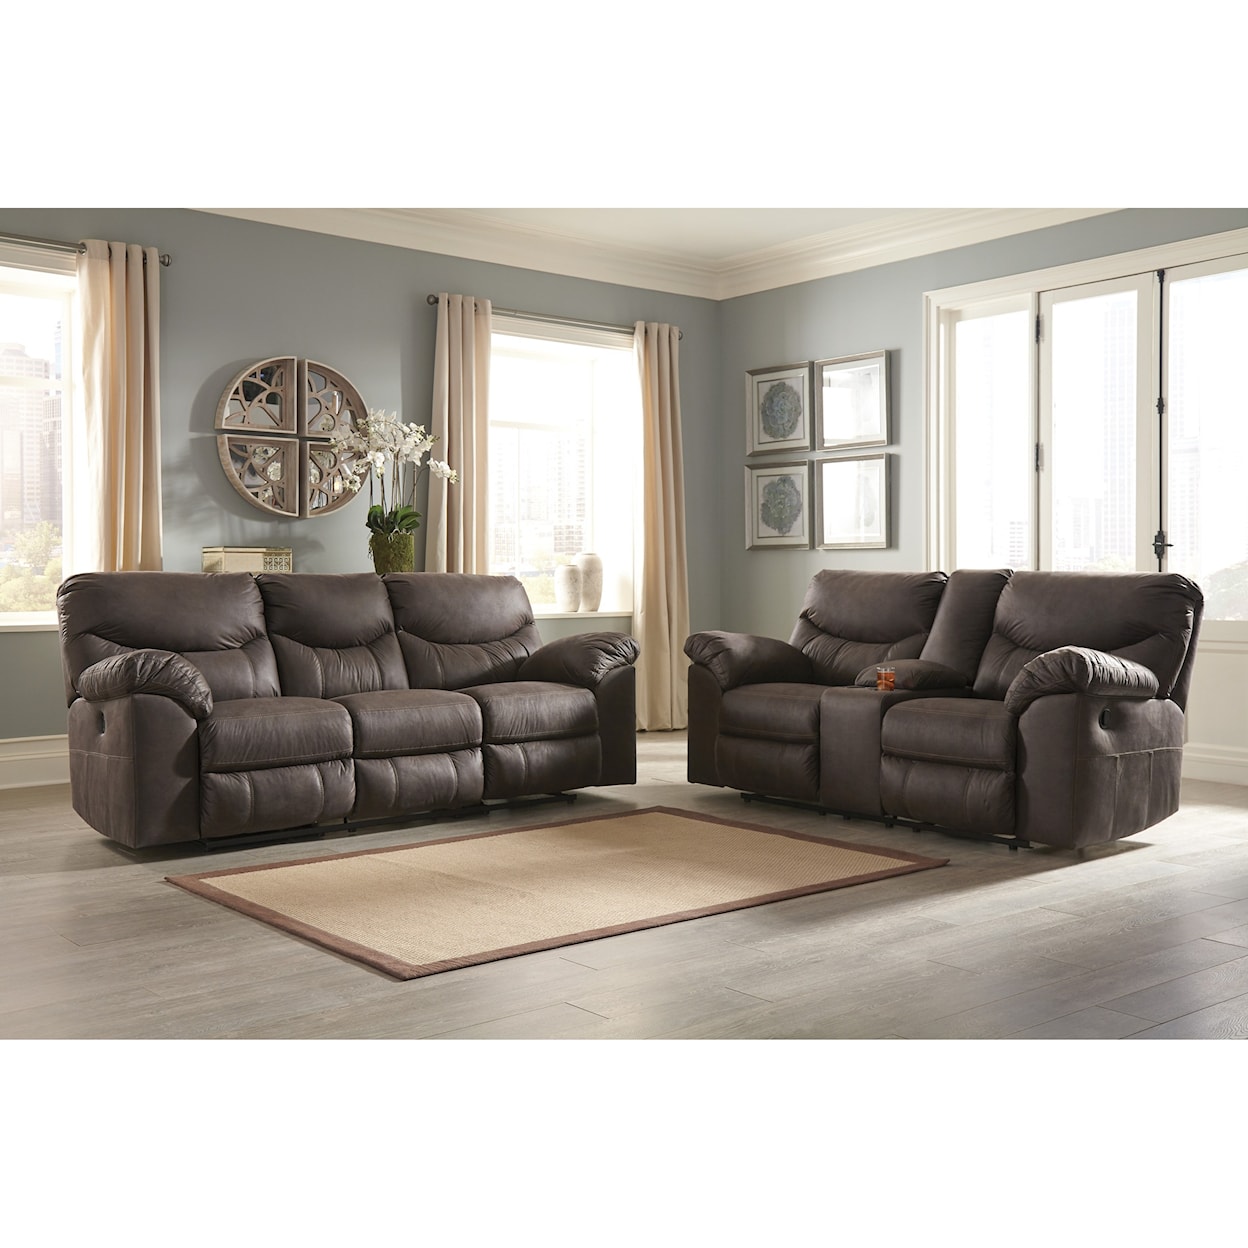 Signature Baxter Reclining Living Room Group